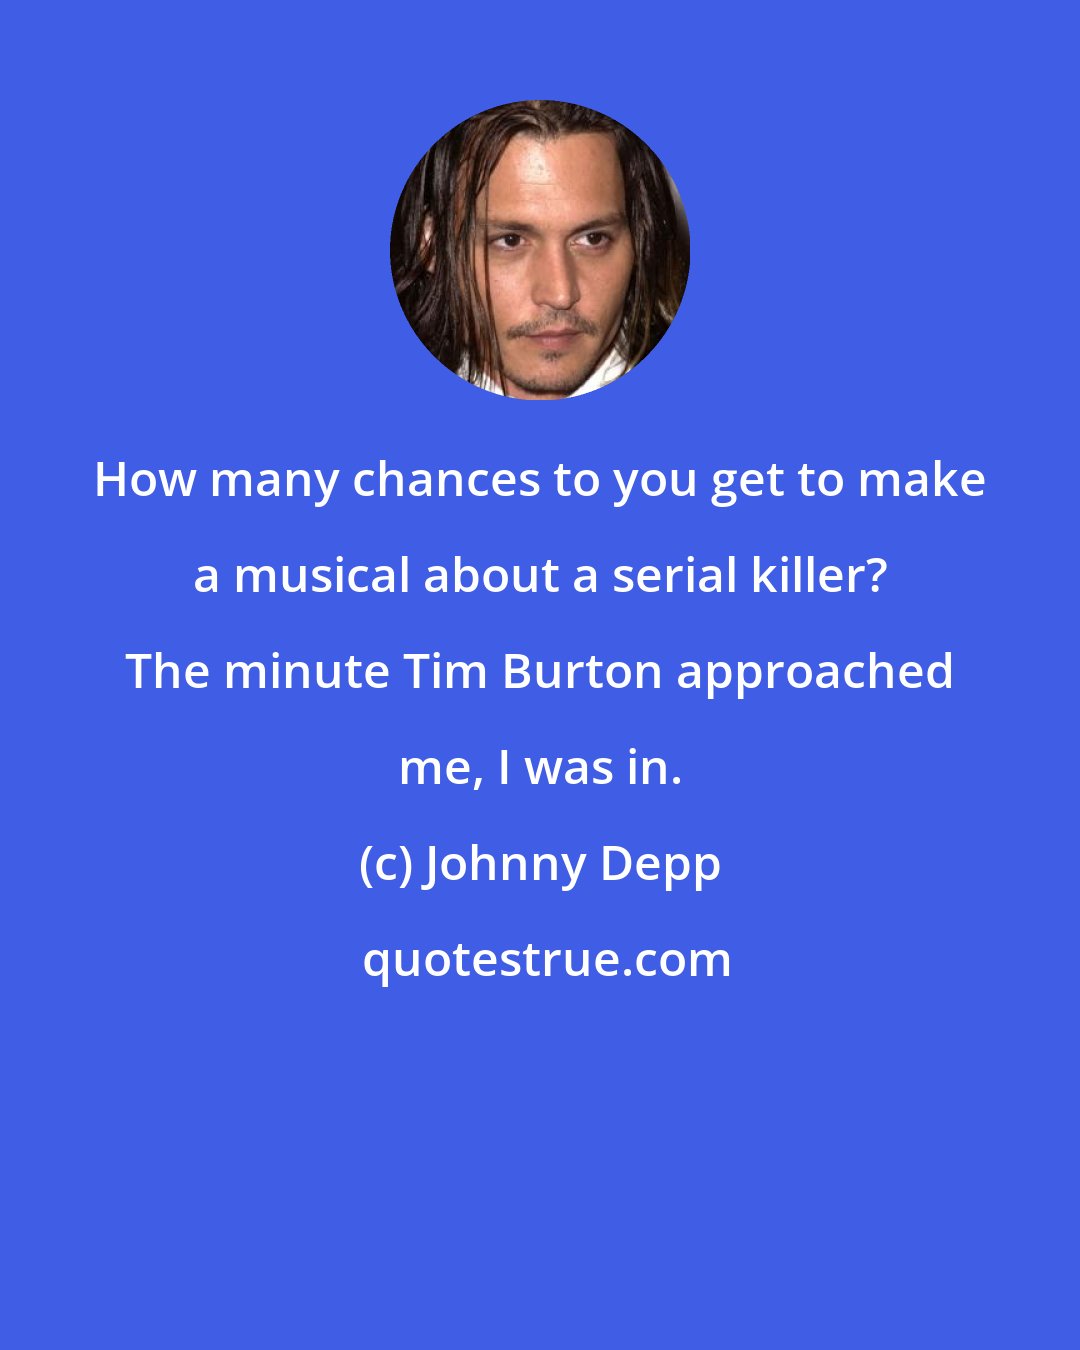 Johnny Depp: How many chances to you get to make a musical about a serial killer? The minute Tim Burton approached me, I was in.